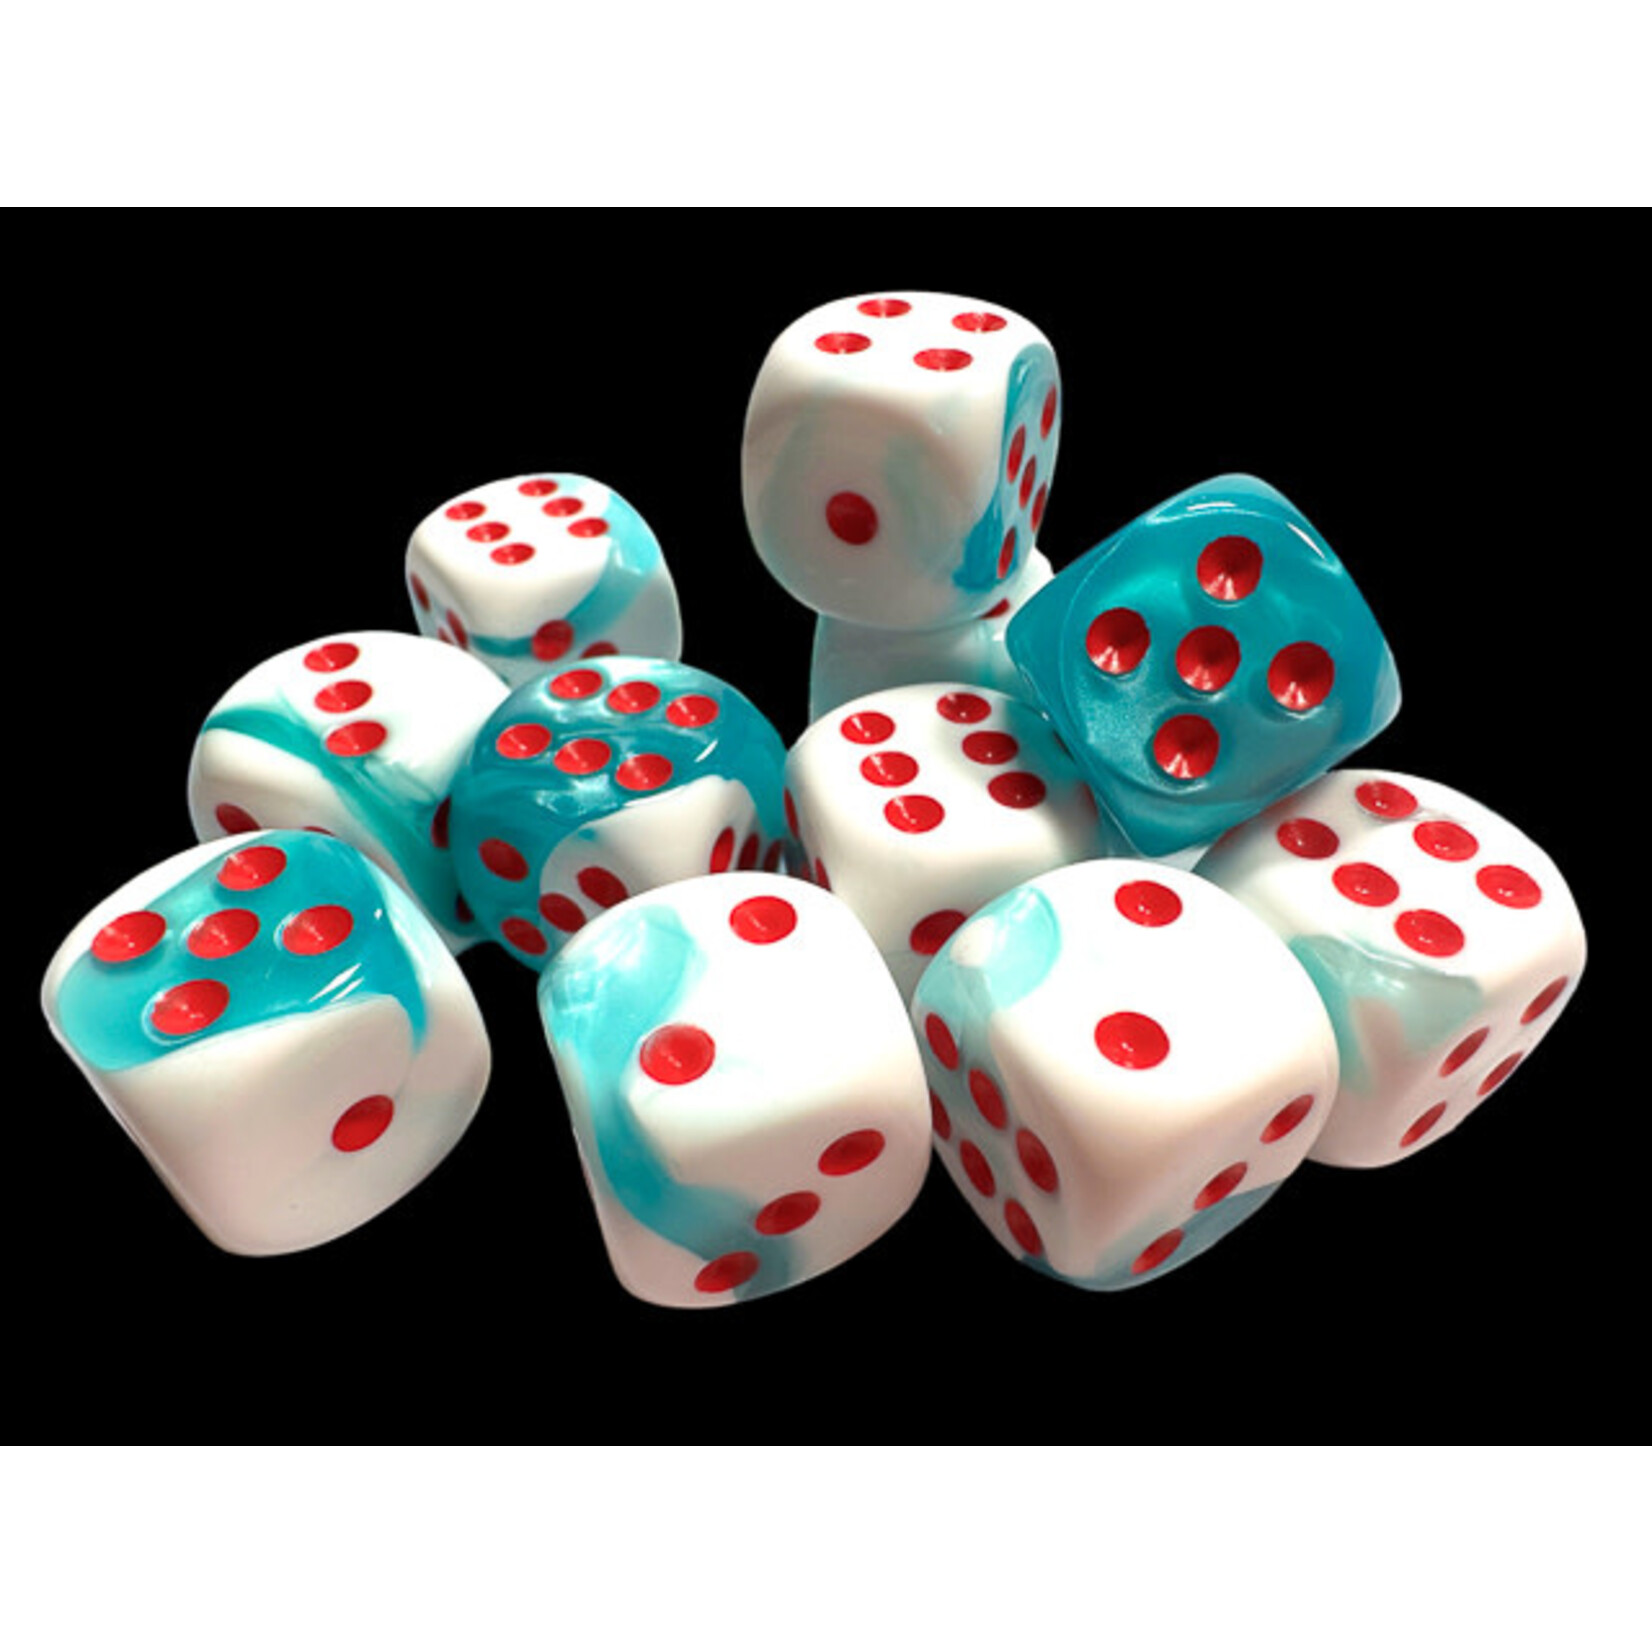 Chessex Limited Edition Gemini® 16mm d6 Teal-White/red Dice Block™ (12 dice)